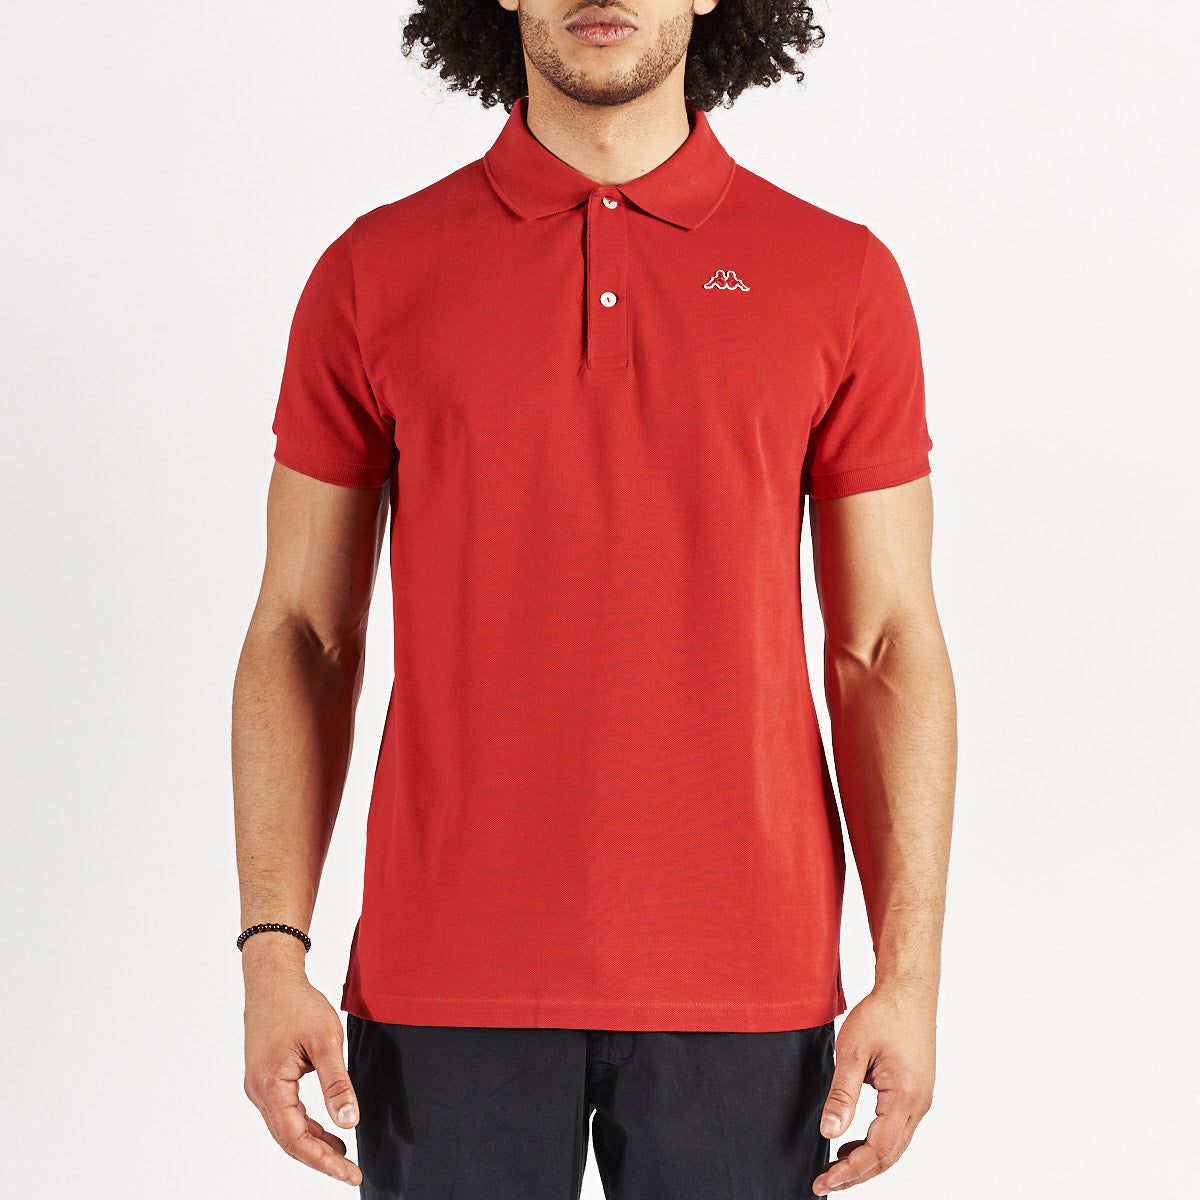 Polo William Robe di Kappa Rouge Homme - Image 1